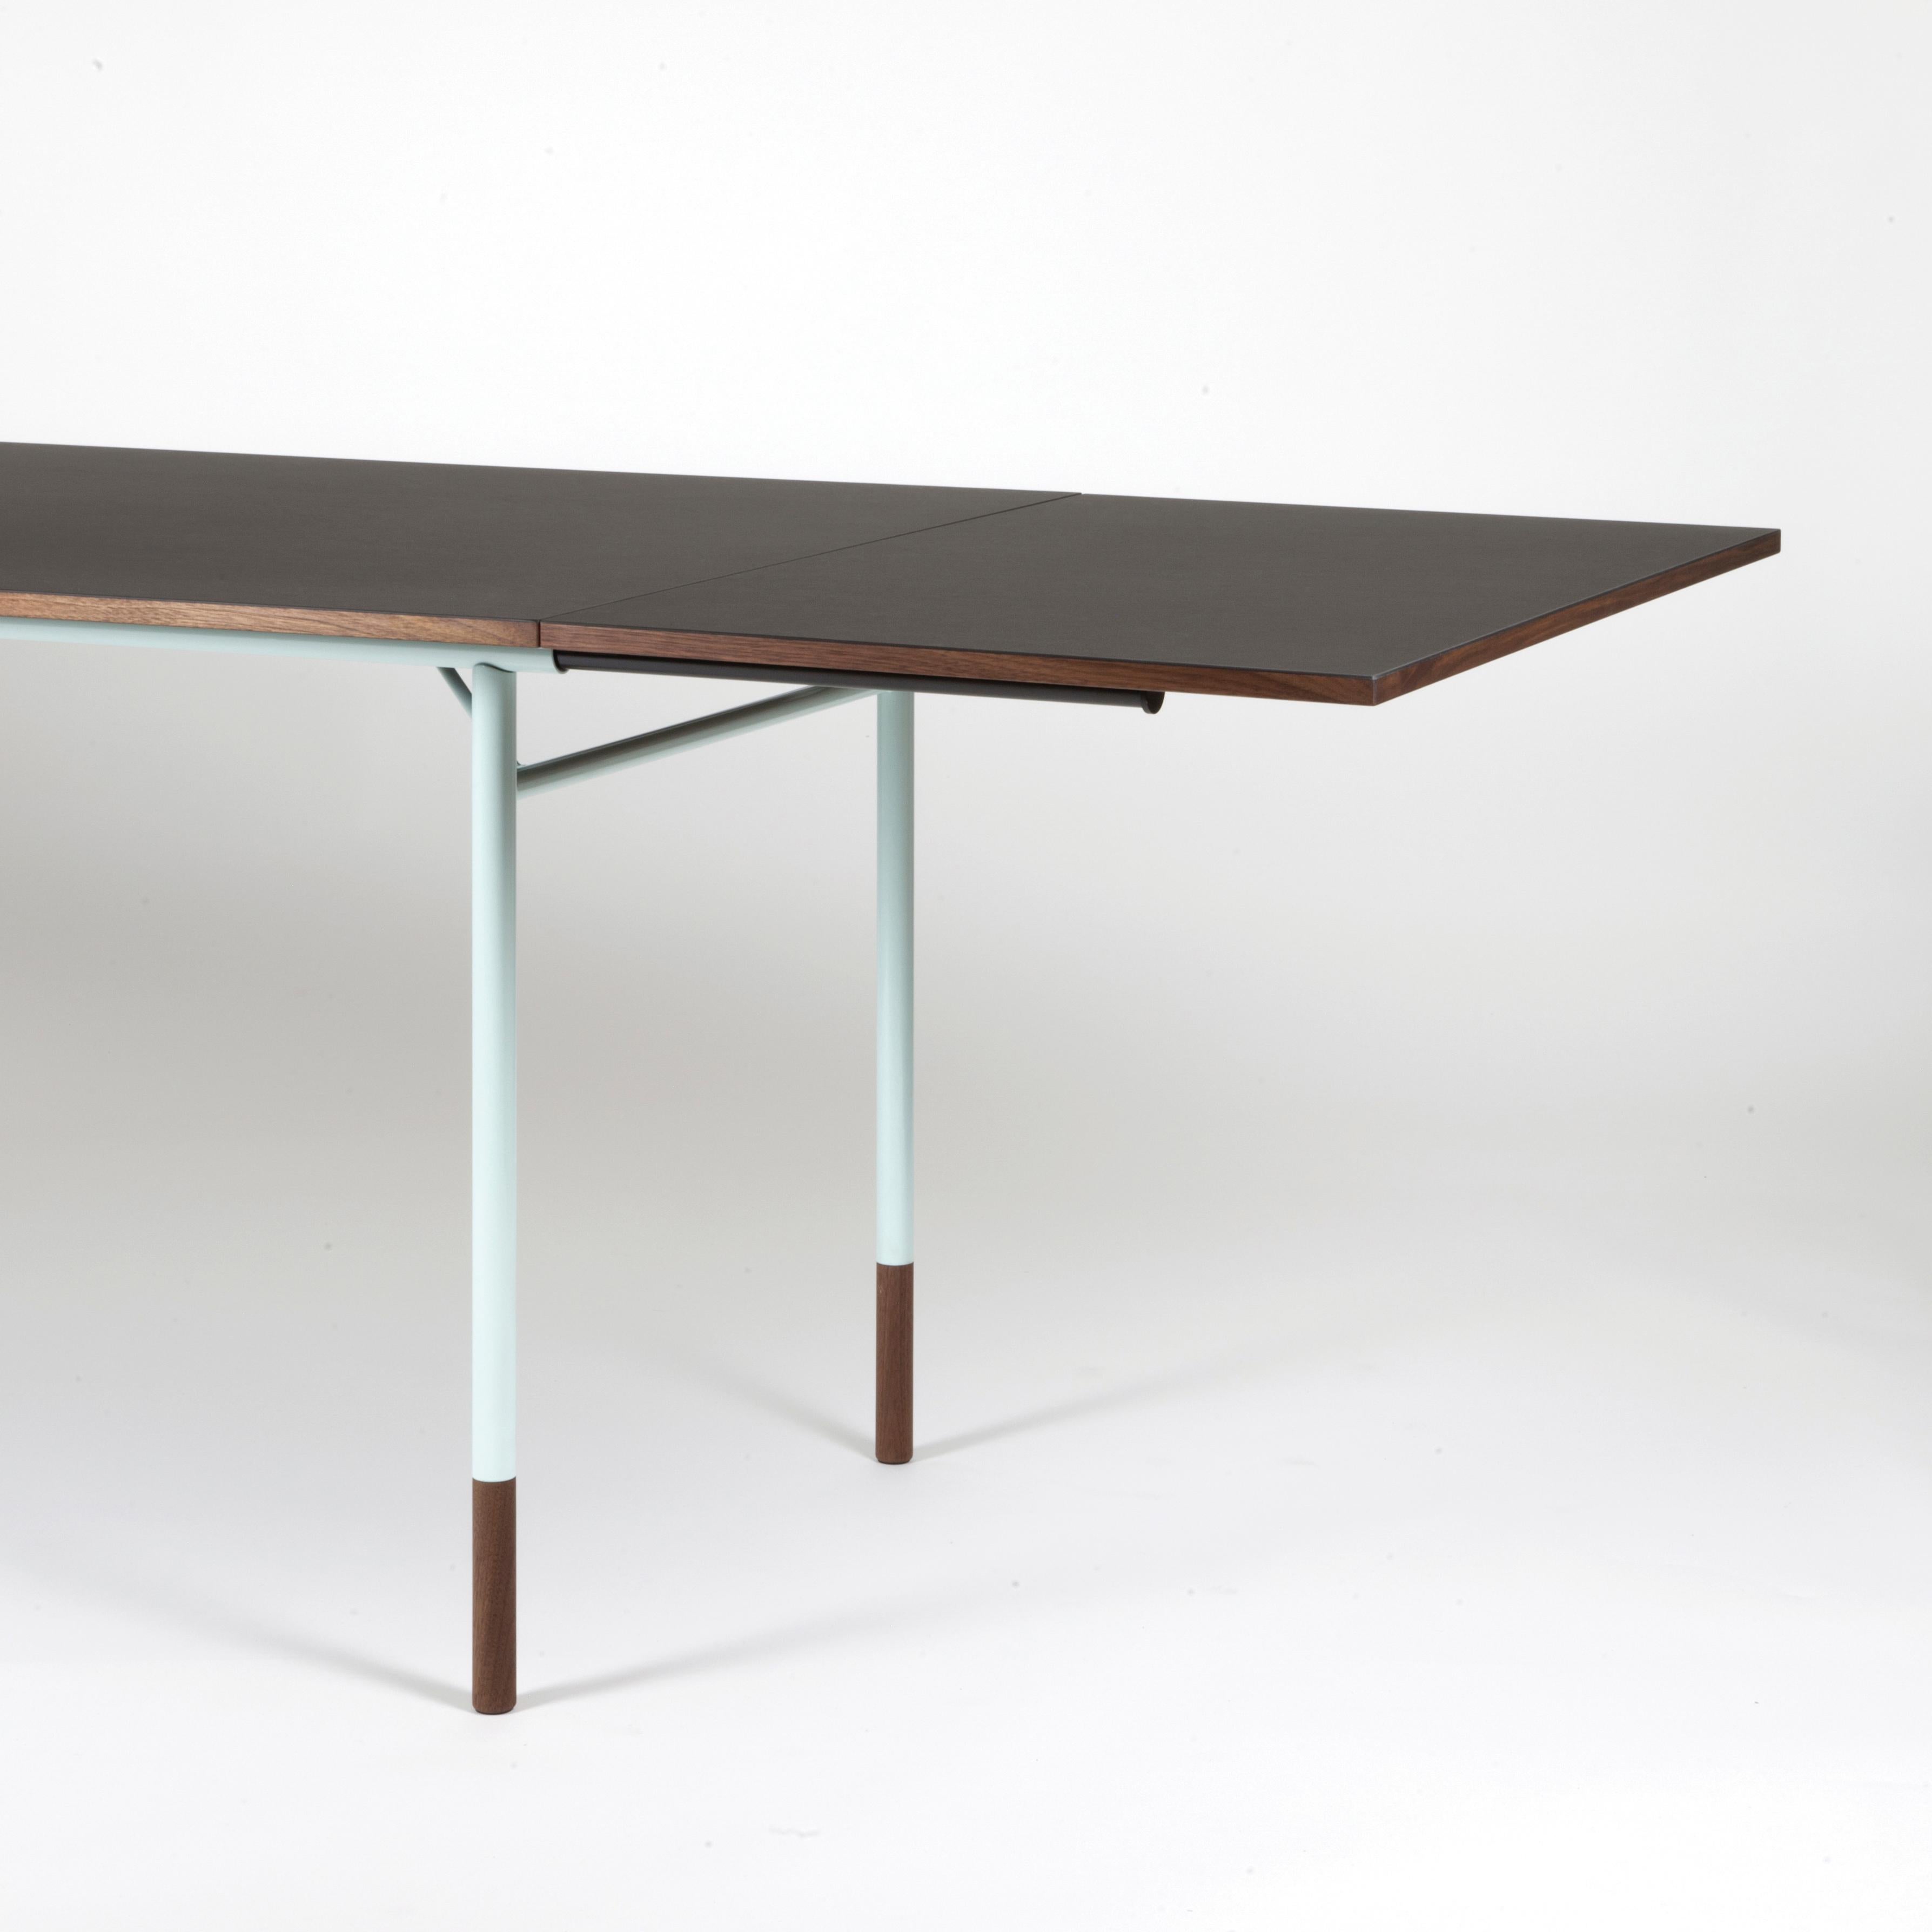 Danish Finn Juhl Nyhavn Dining Table with Two Drop Leaves, Lino and Wood